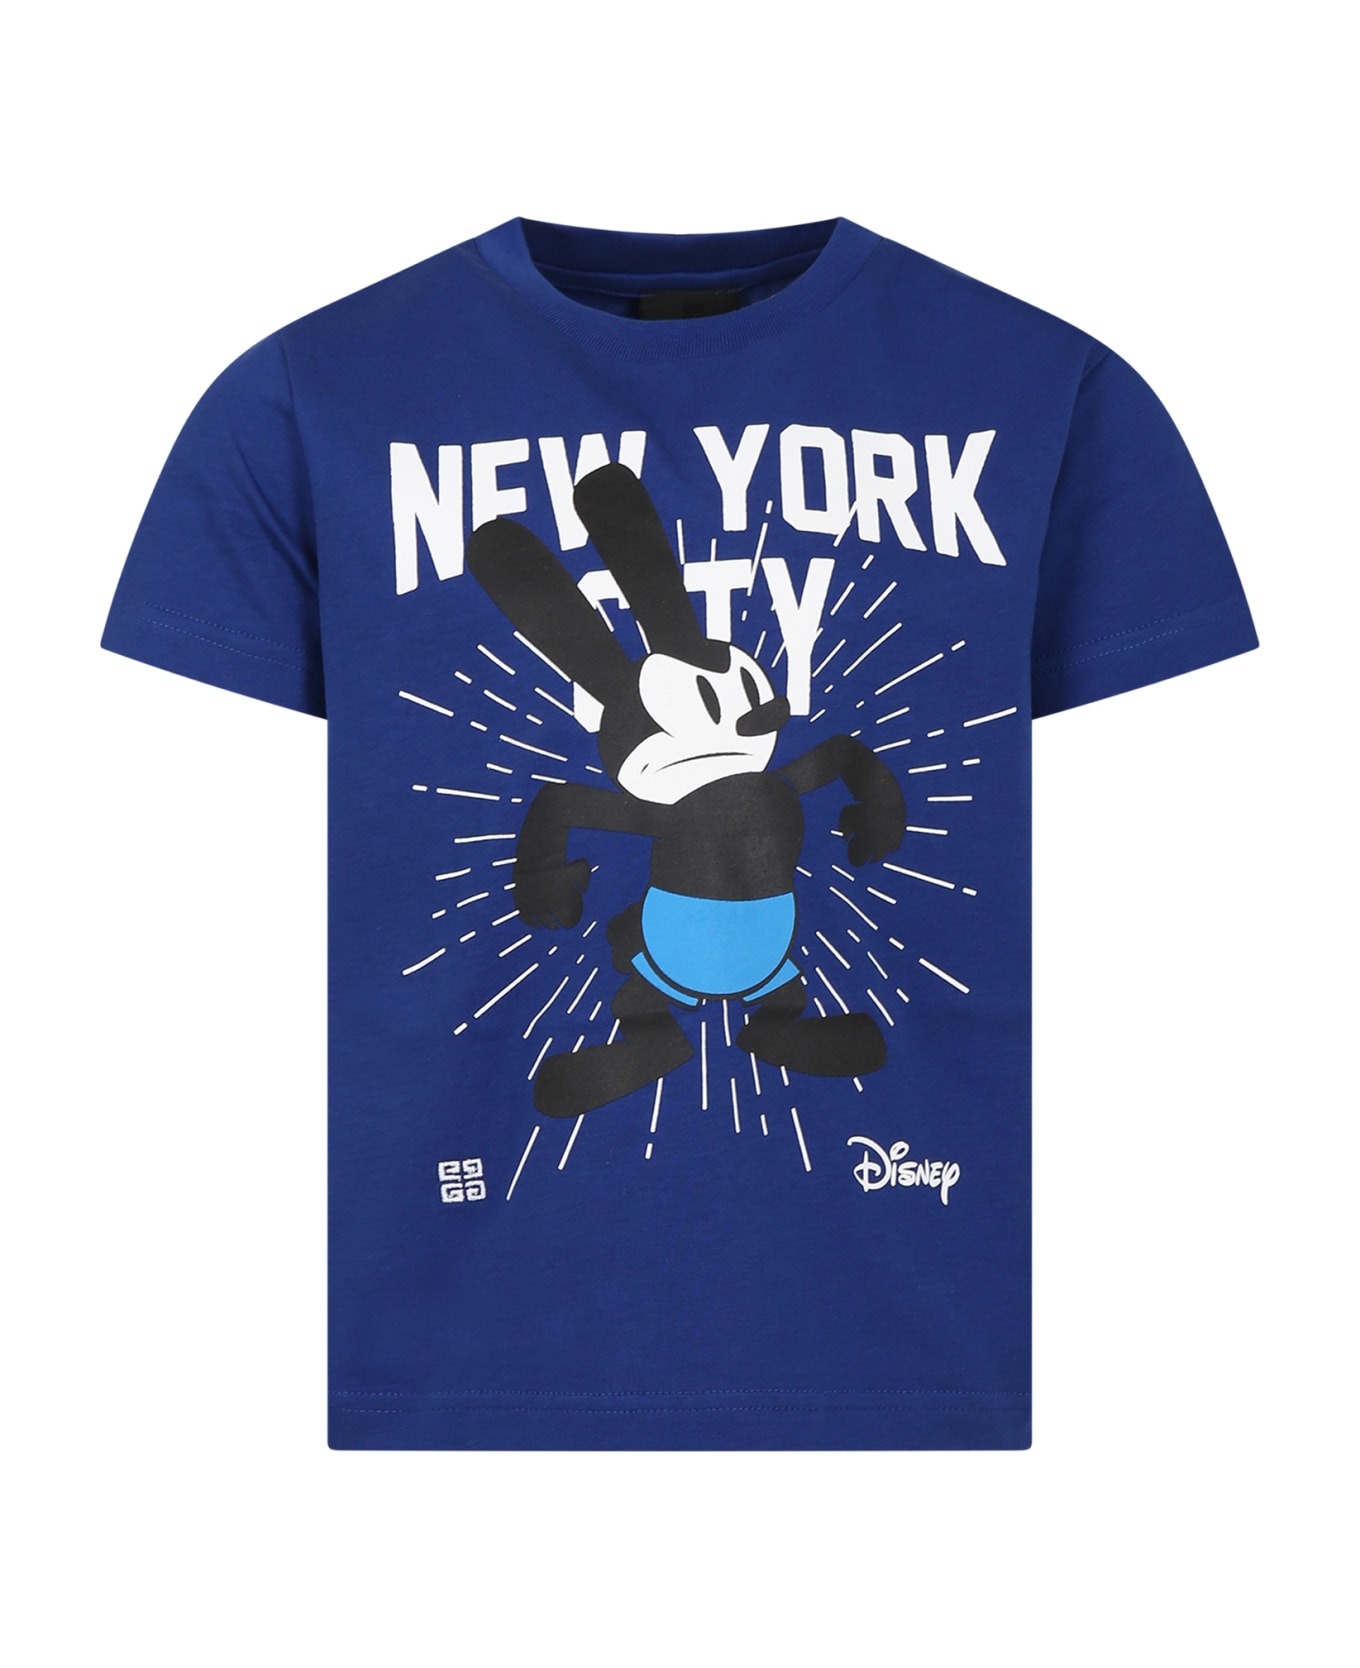 Givenchy Blue T-shirt For Kids With Oswald And Logo - Marine